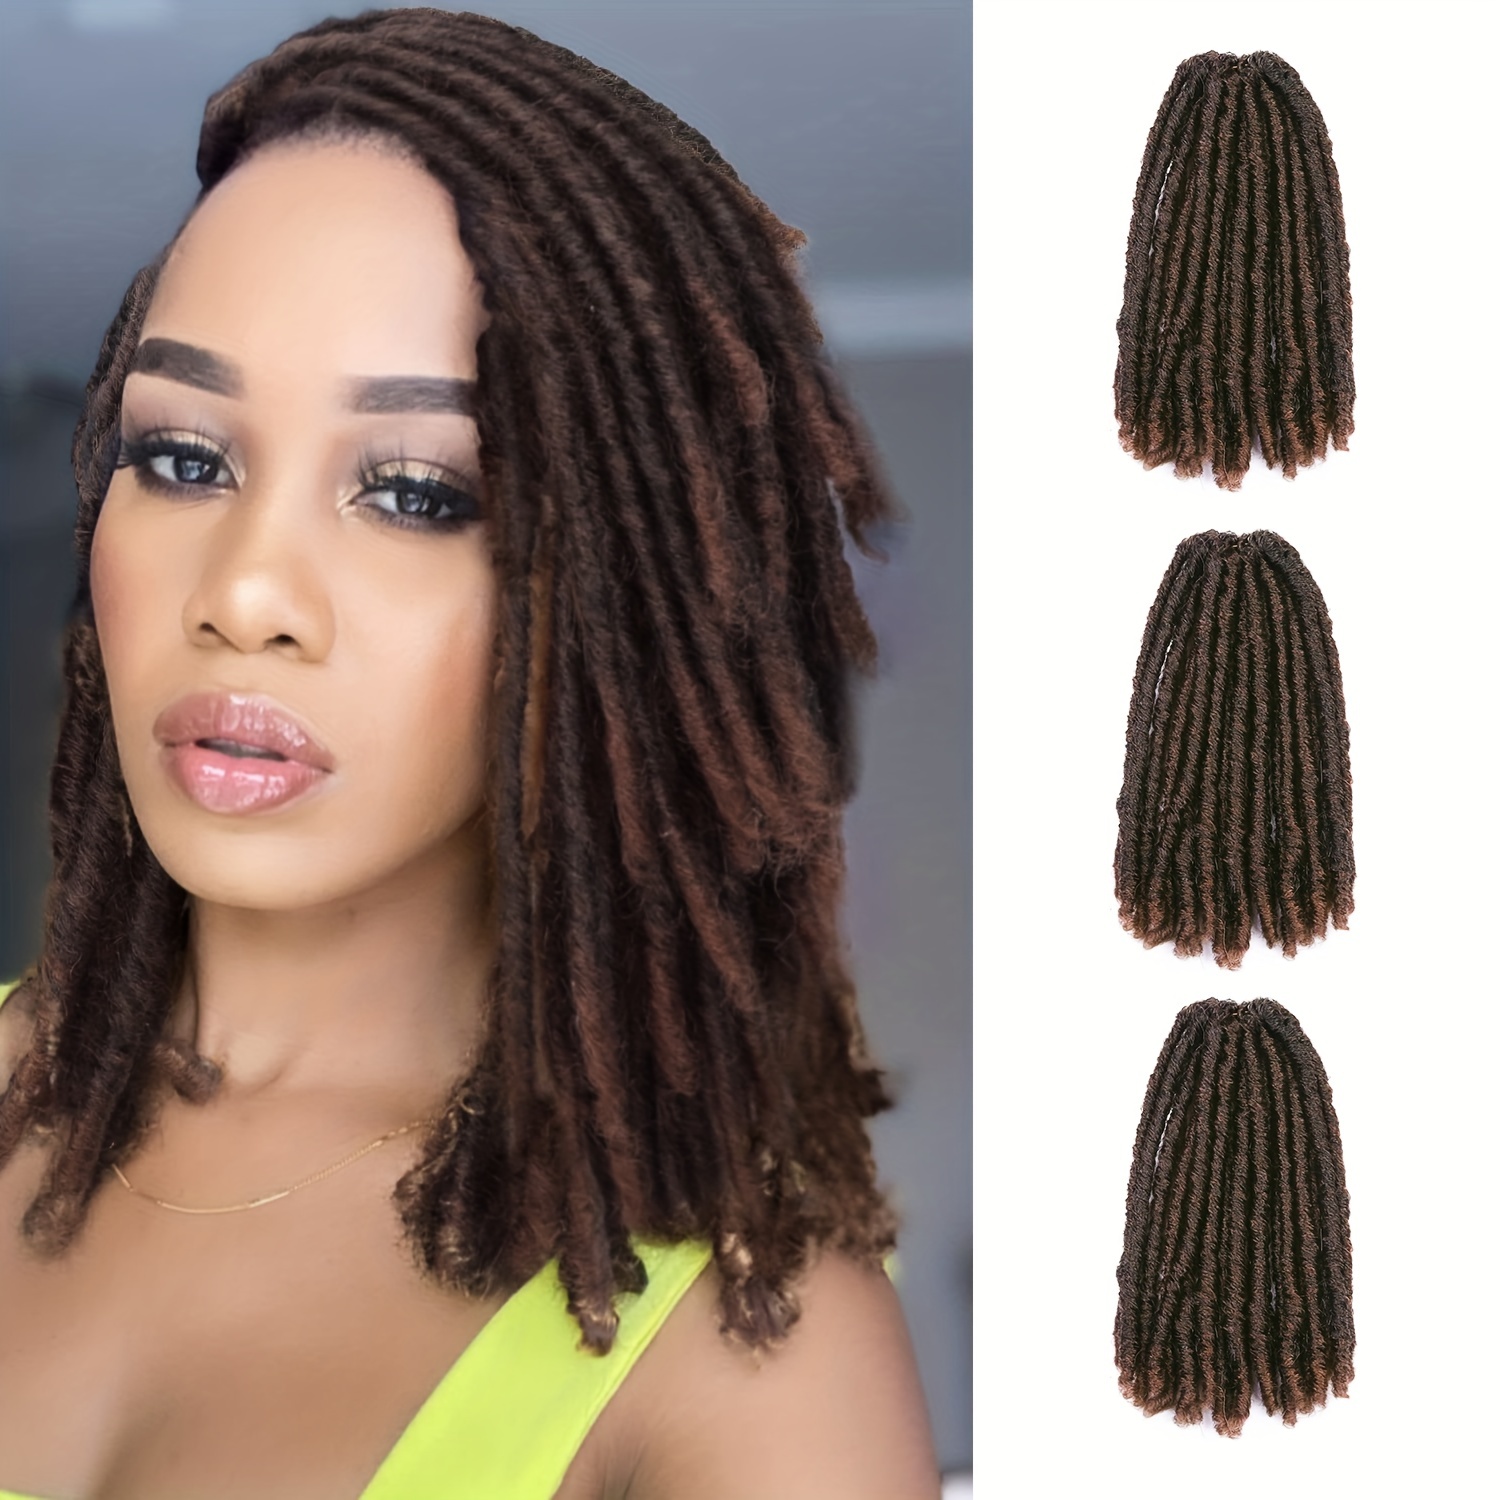 7 Women Rocking Thick Short Faux Locs You Should See + Two Tutorials -  Emily CottonTop